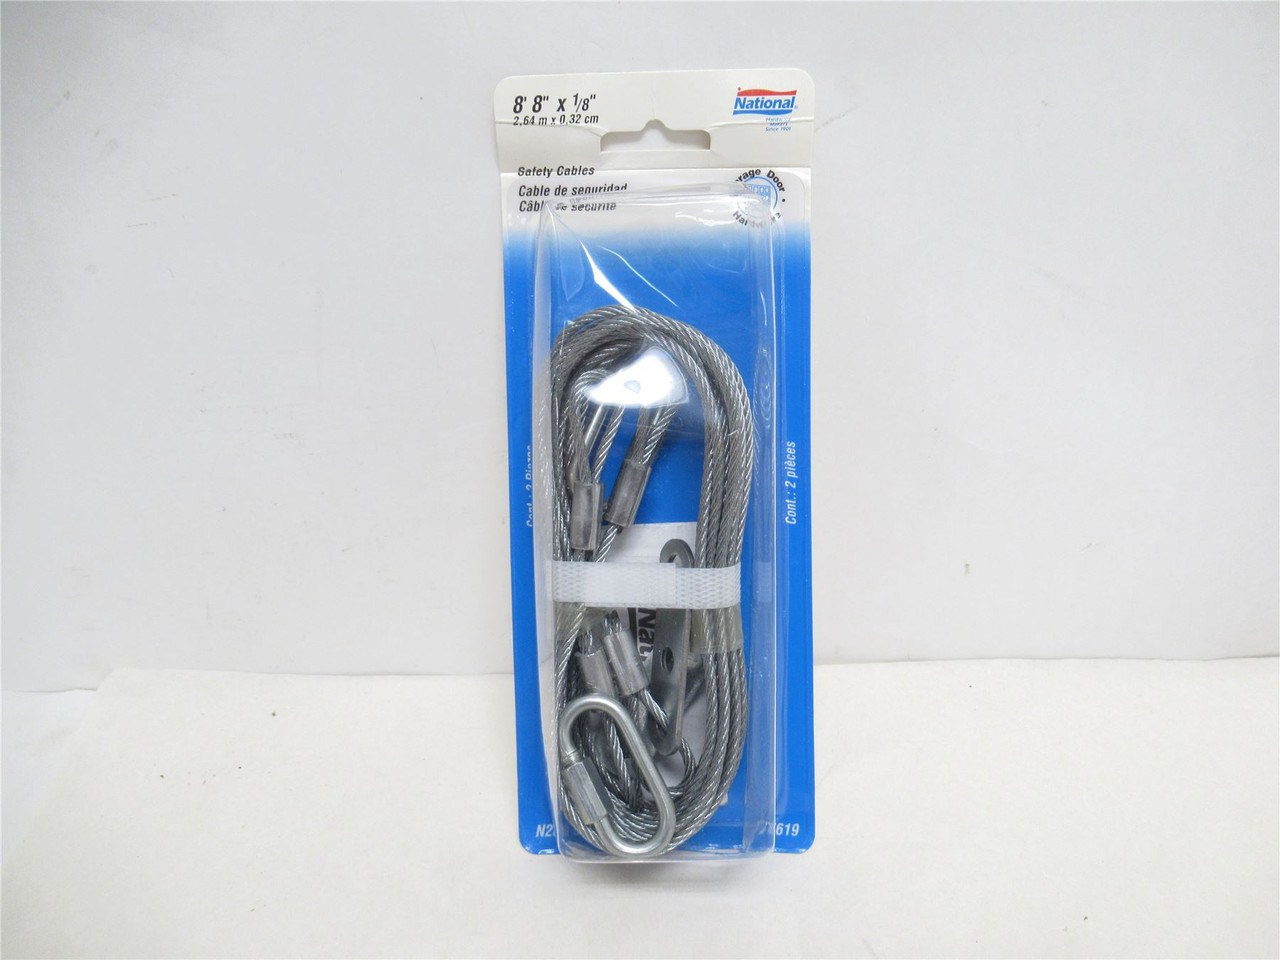 National N280-388; Box-2 Safety Cables 8ft-8in x 1/8in